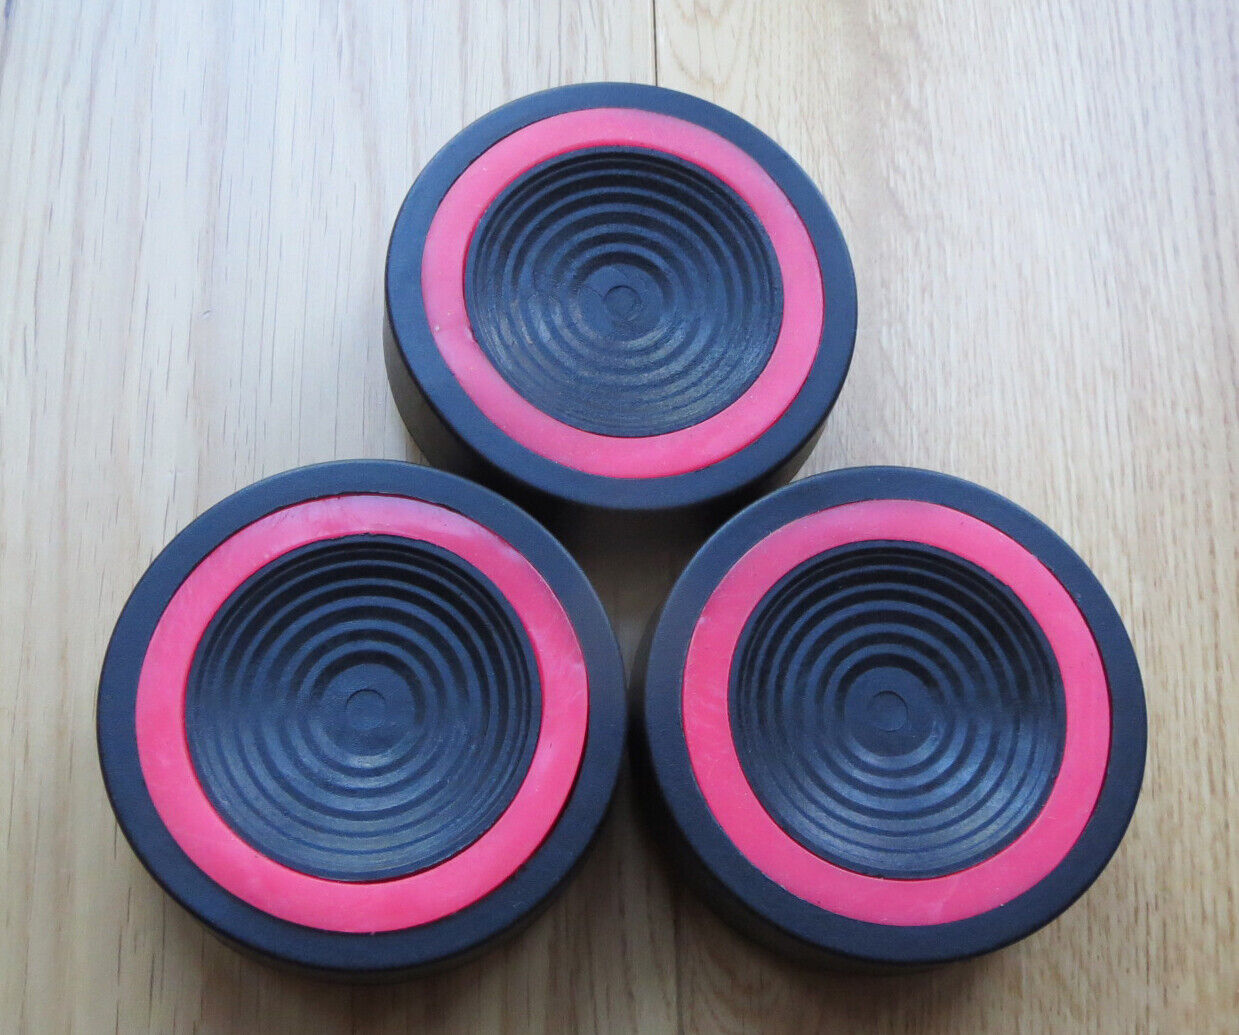 A Set of 3 Tripod Vibration Suppression Pads/Dampers for Telescope, High Quality